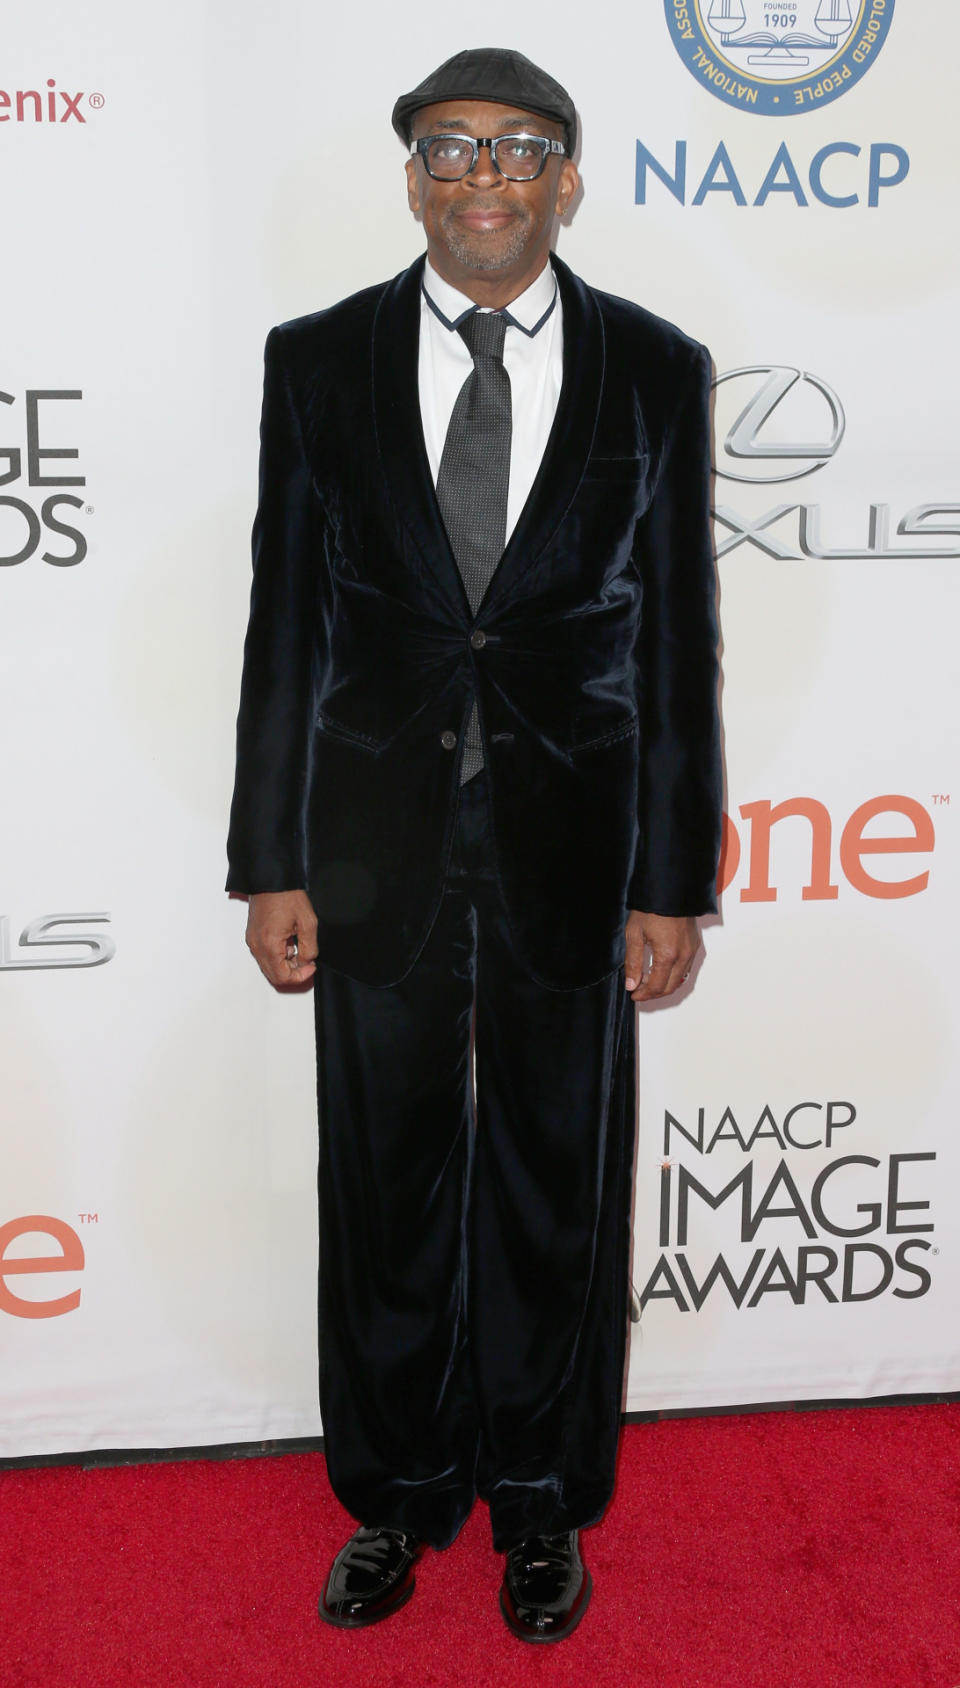 Spike Lee at the 46th NAACP Annual Image Awards